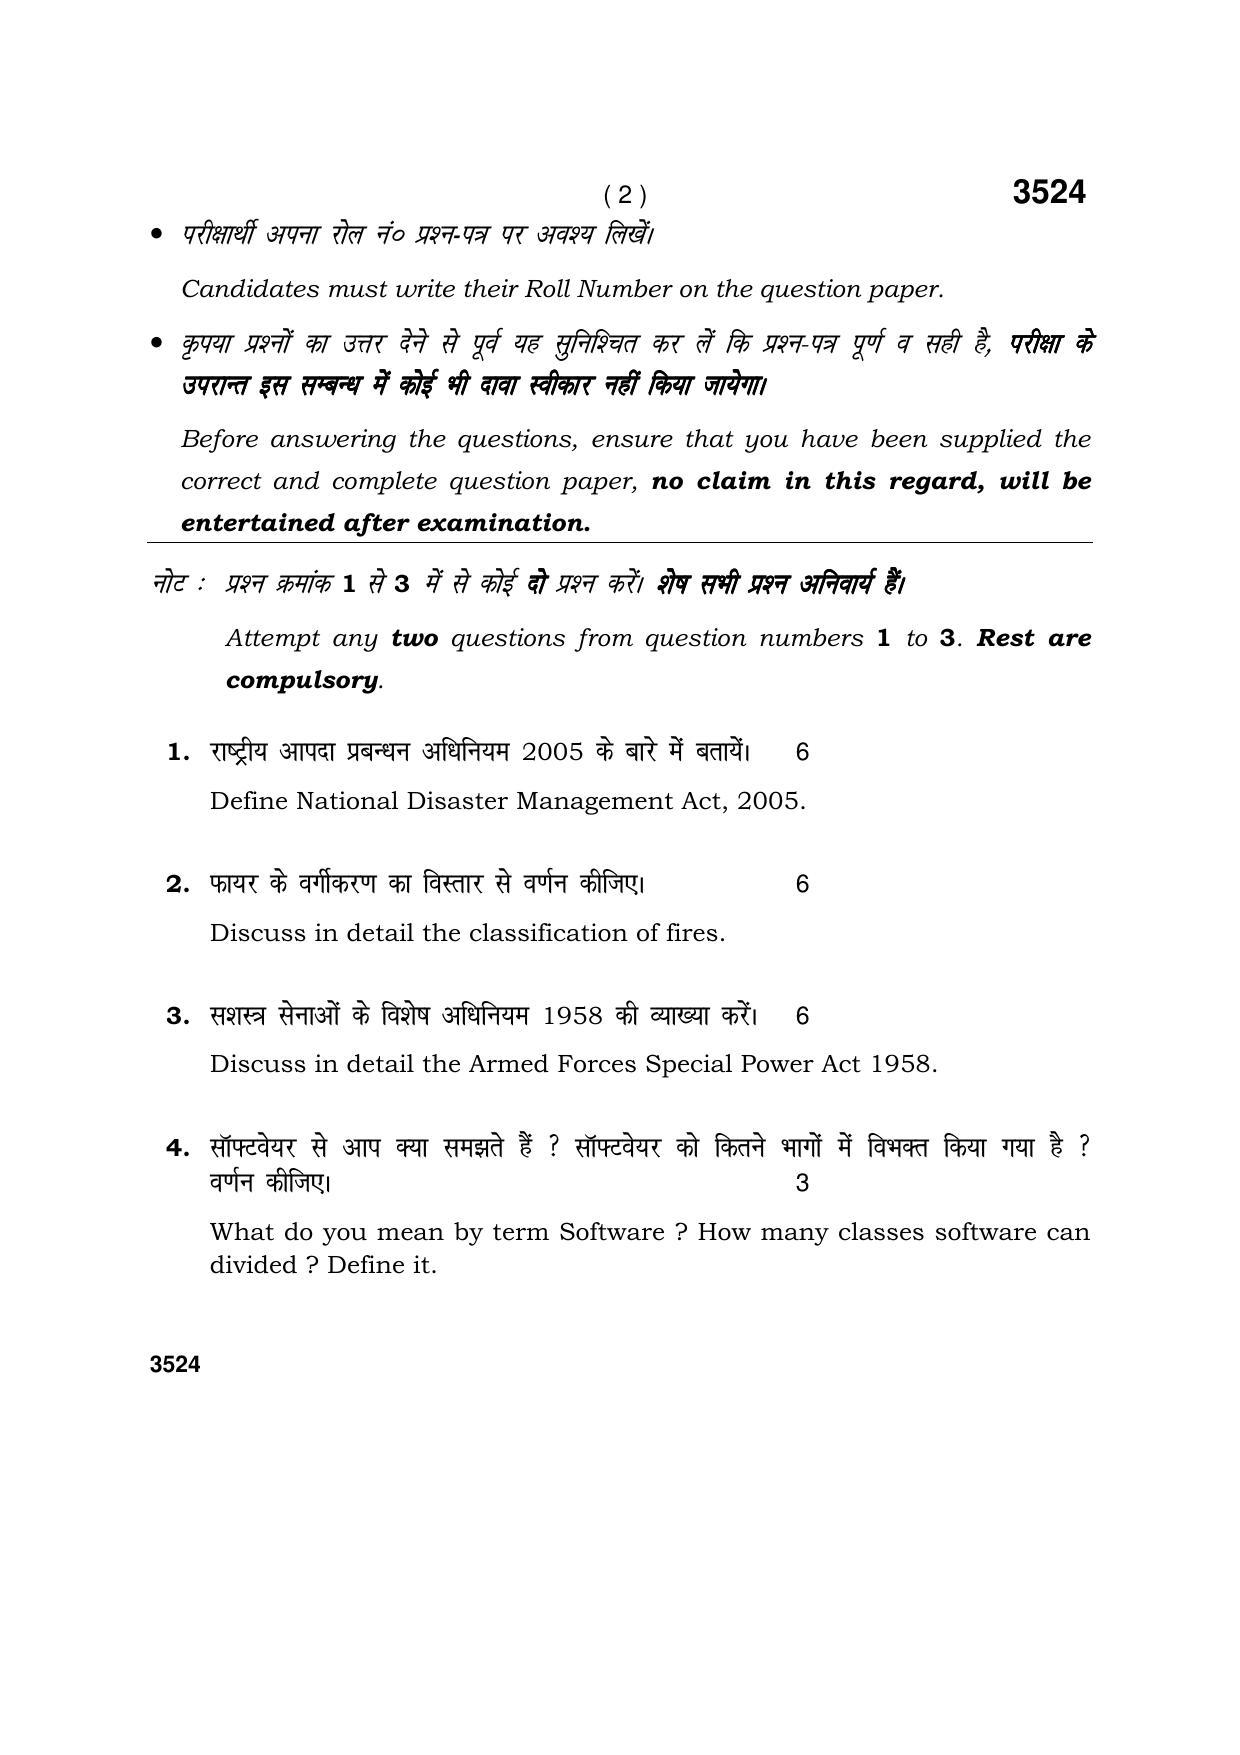 Haryana Board HBSE Class 10 Security 2018 Question Paper - Page 2